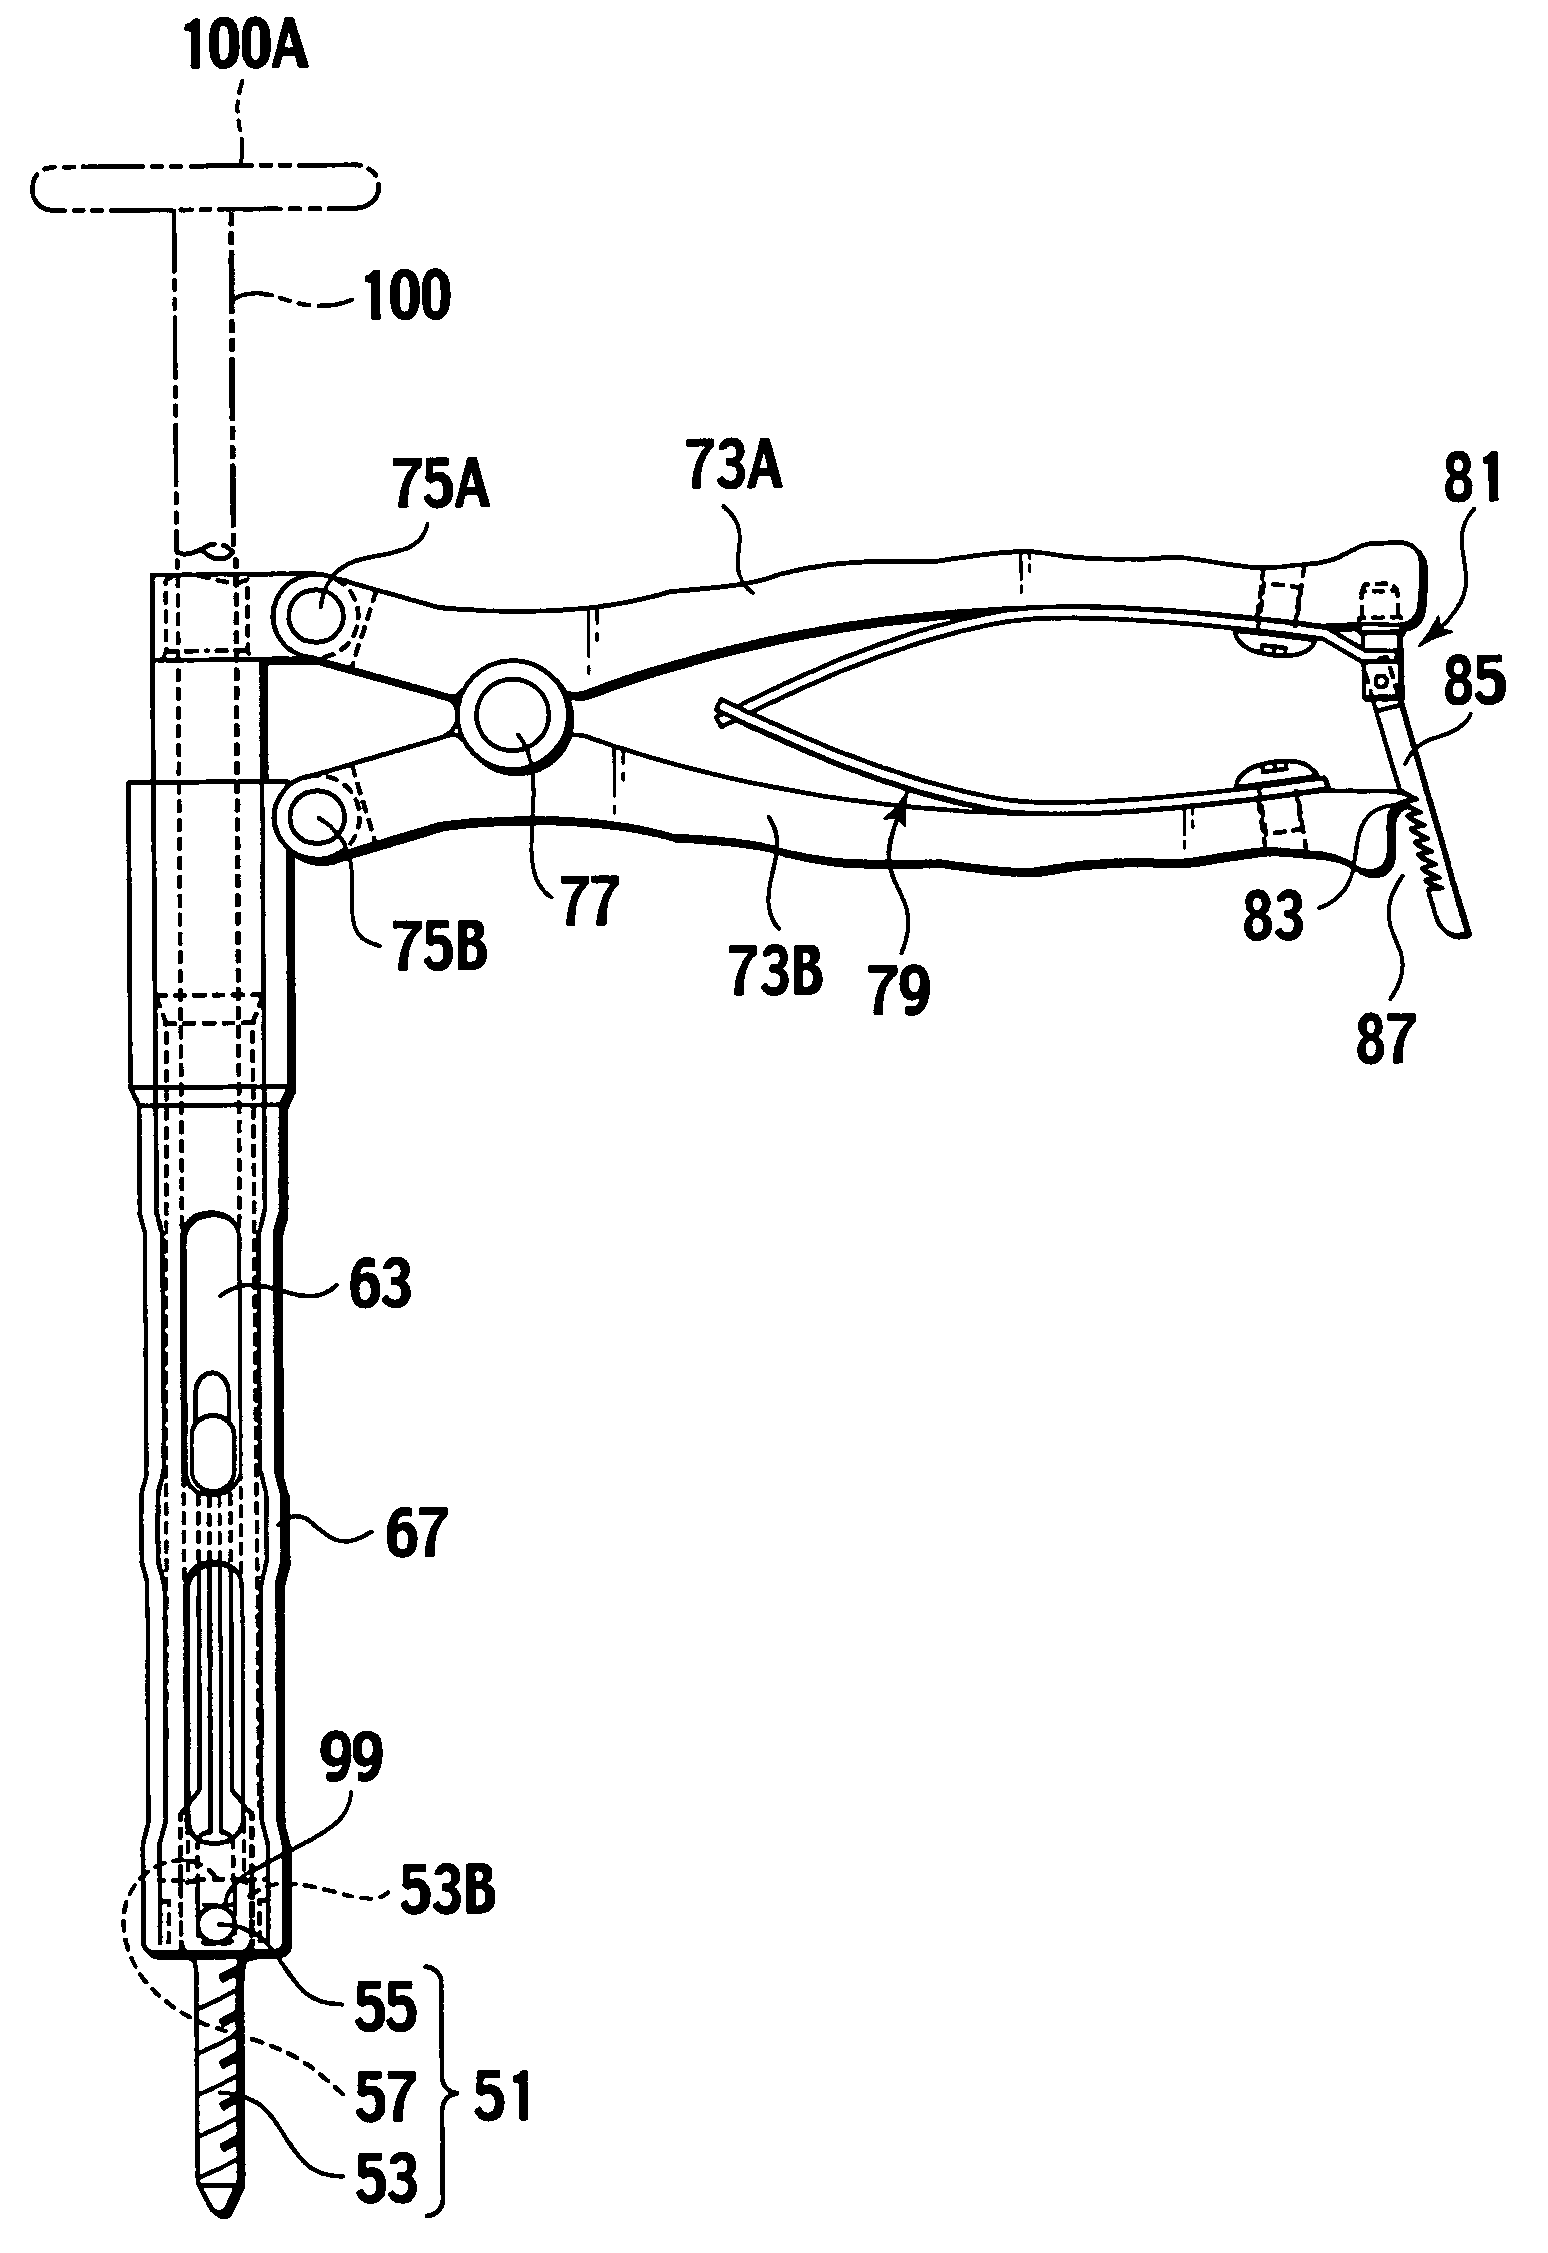 Auxiliary instrument for fixing rod